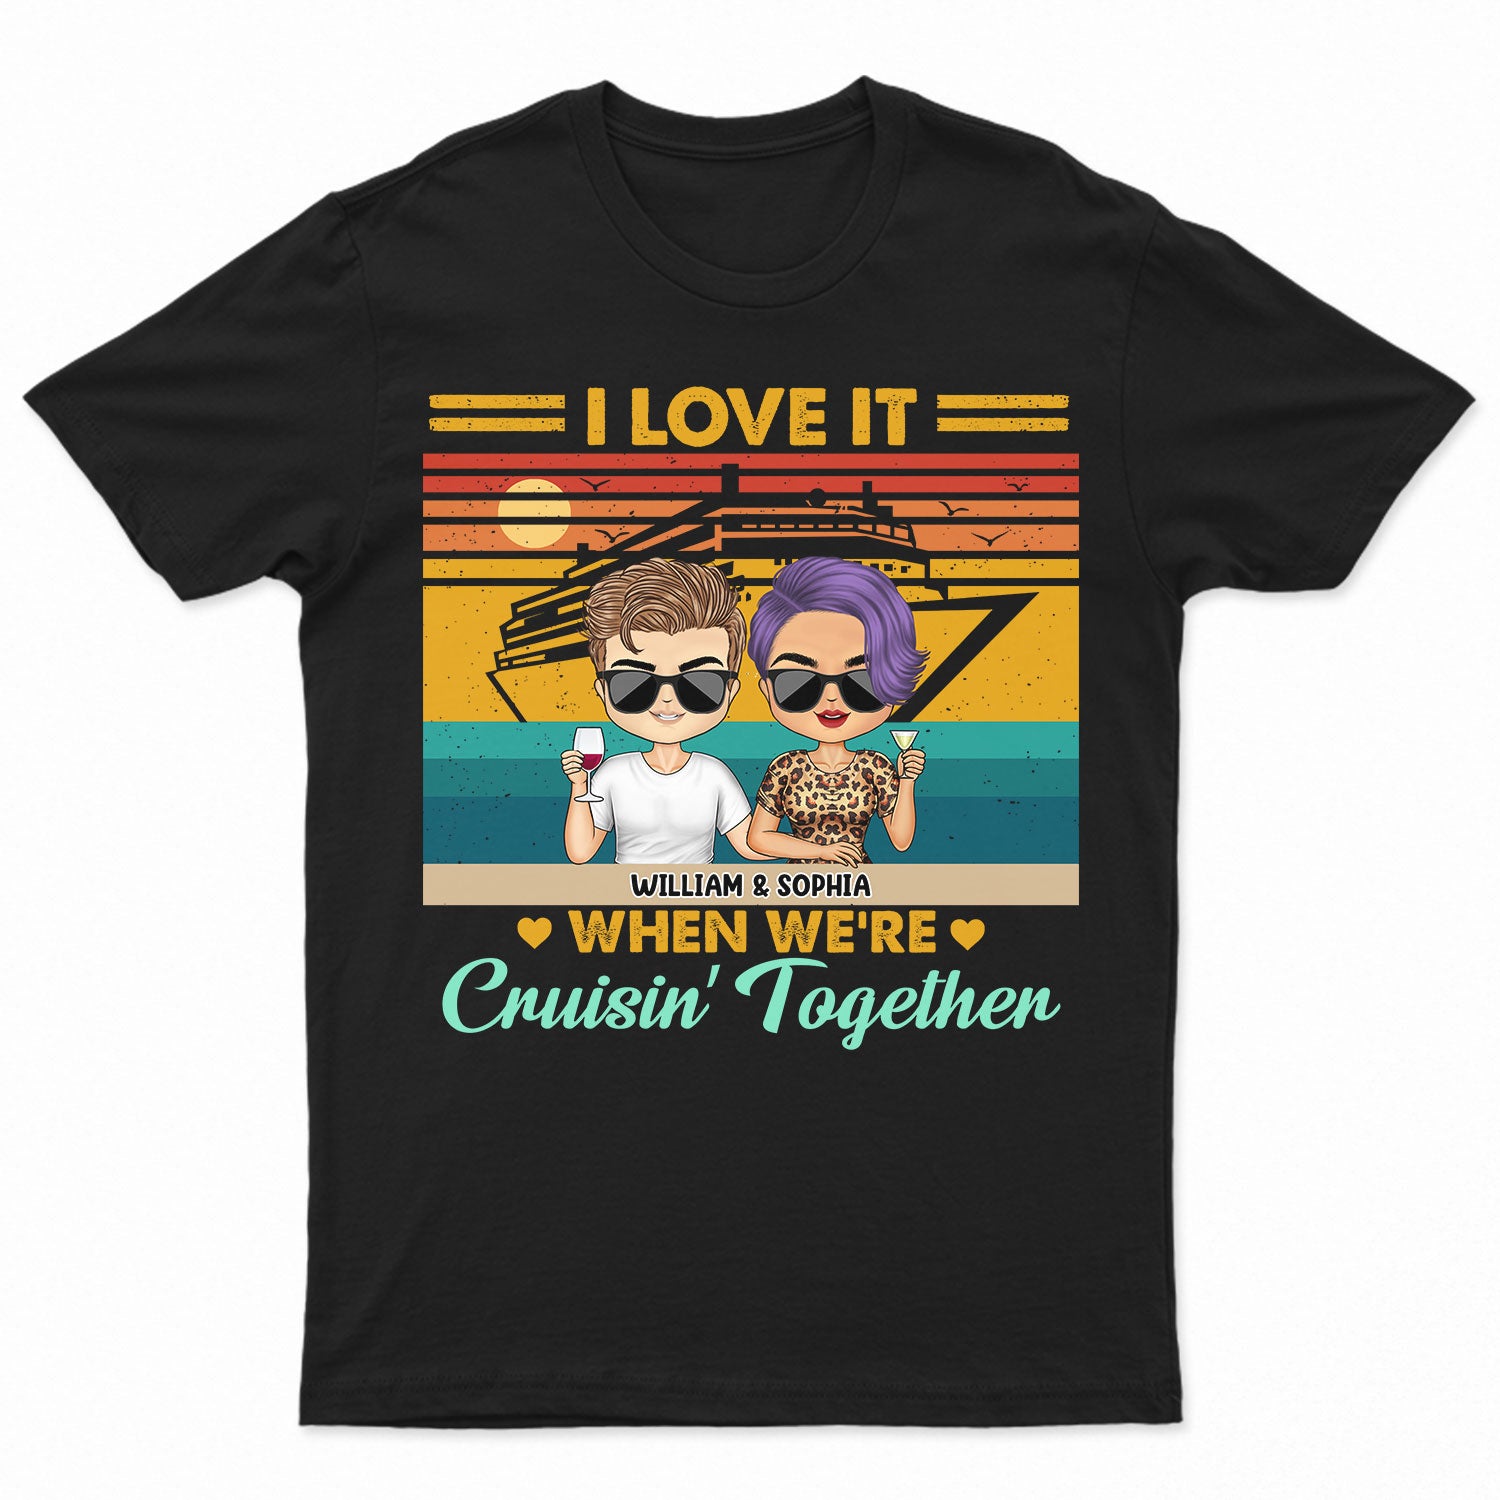 Love It When We're Cruisin' Together - Traveling, Cruising Gift For Couples, Spouse, Wife, Husband, Girlfriend, Boyfriend - Personalized T Shirt